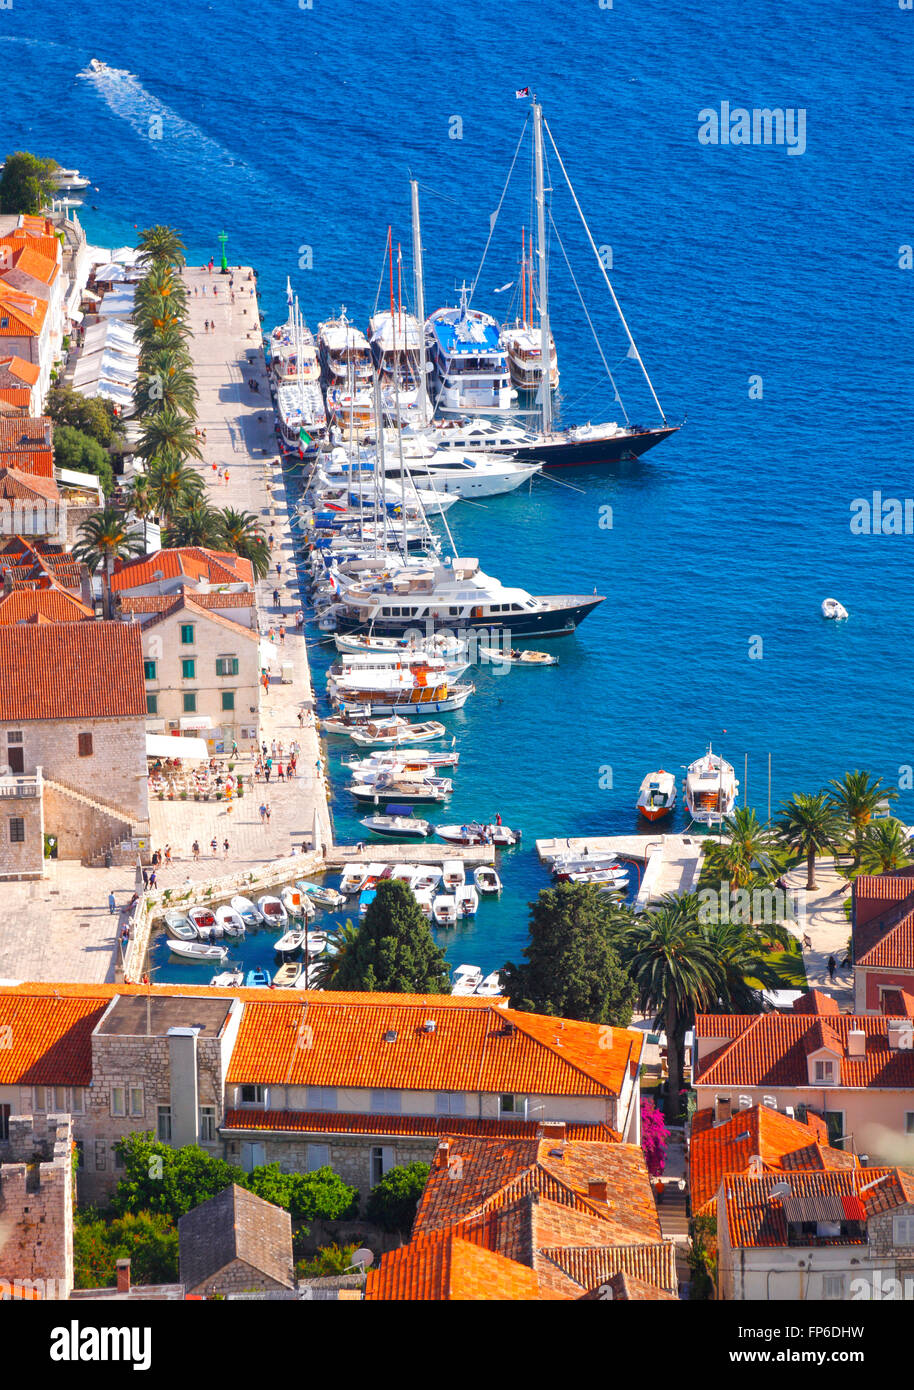 Marina with yachts and promenade in old town Hvar Stock Photo